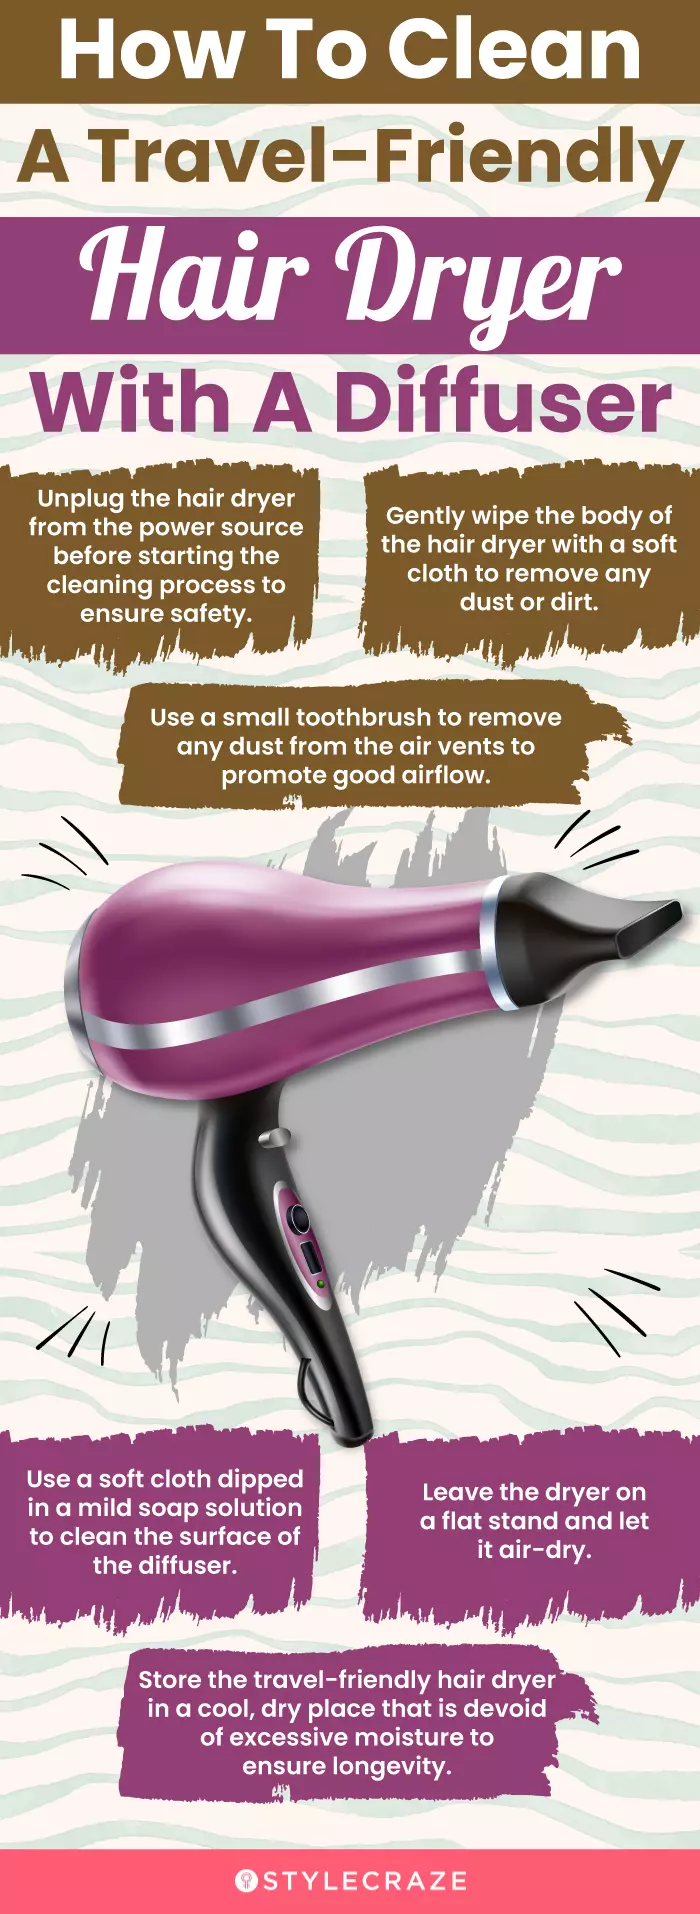 How To Clean A Travel-Friendly Hair Dryer With A Diffuser (infographic)